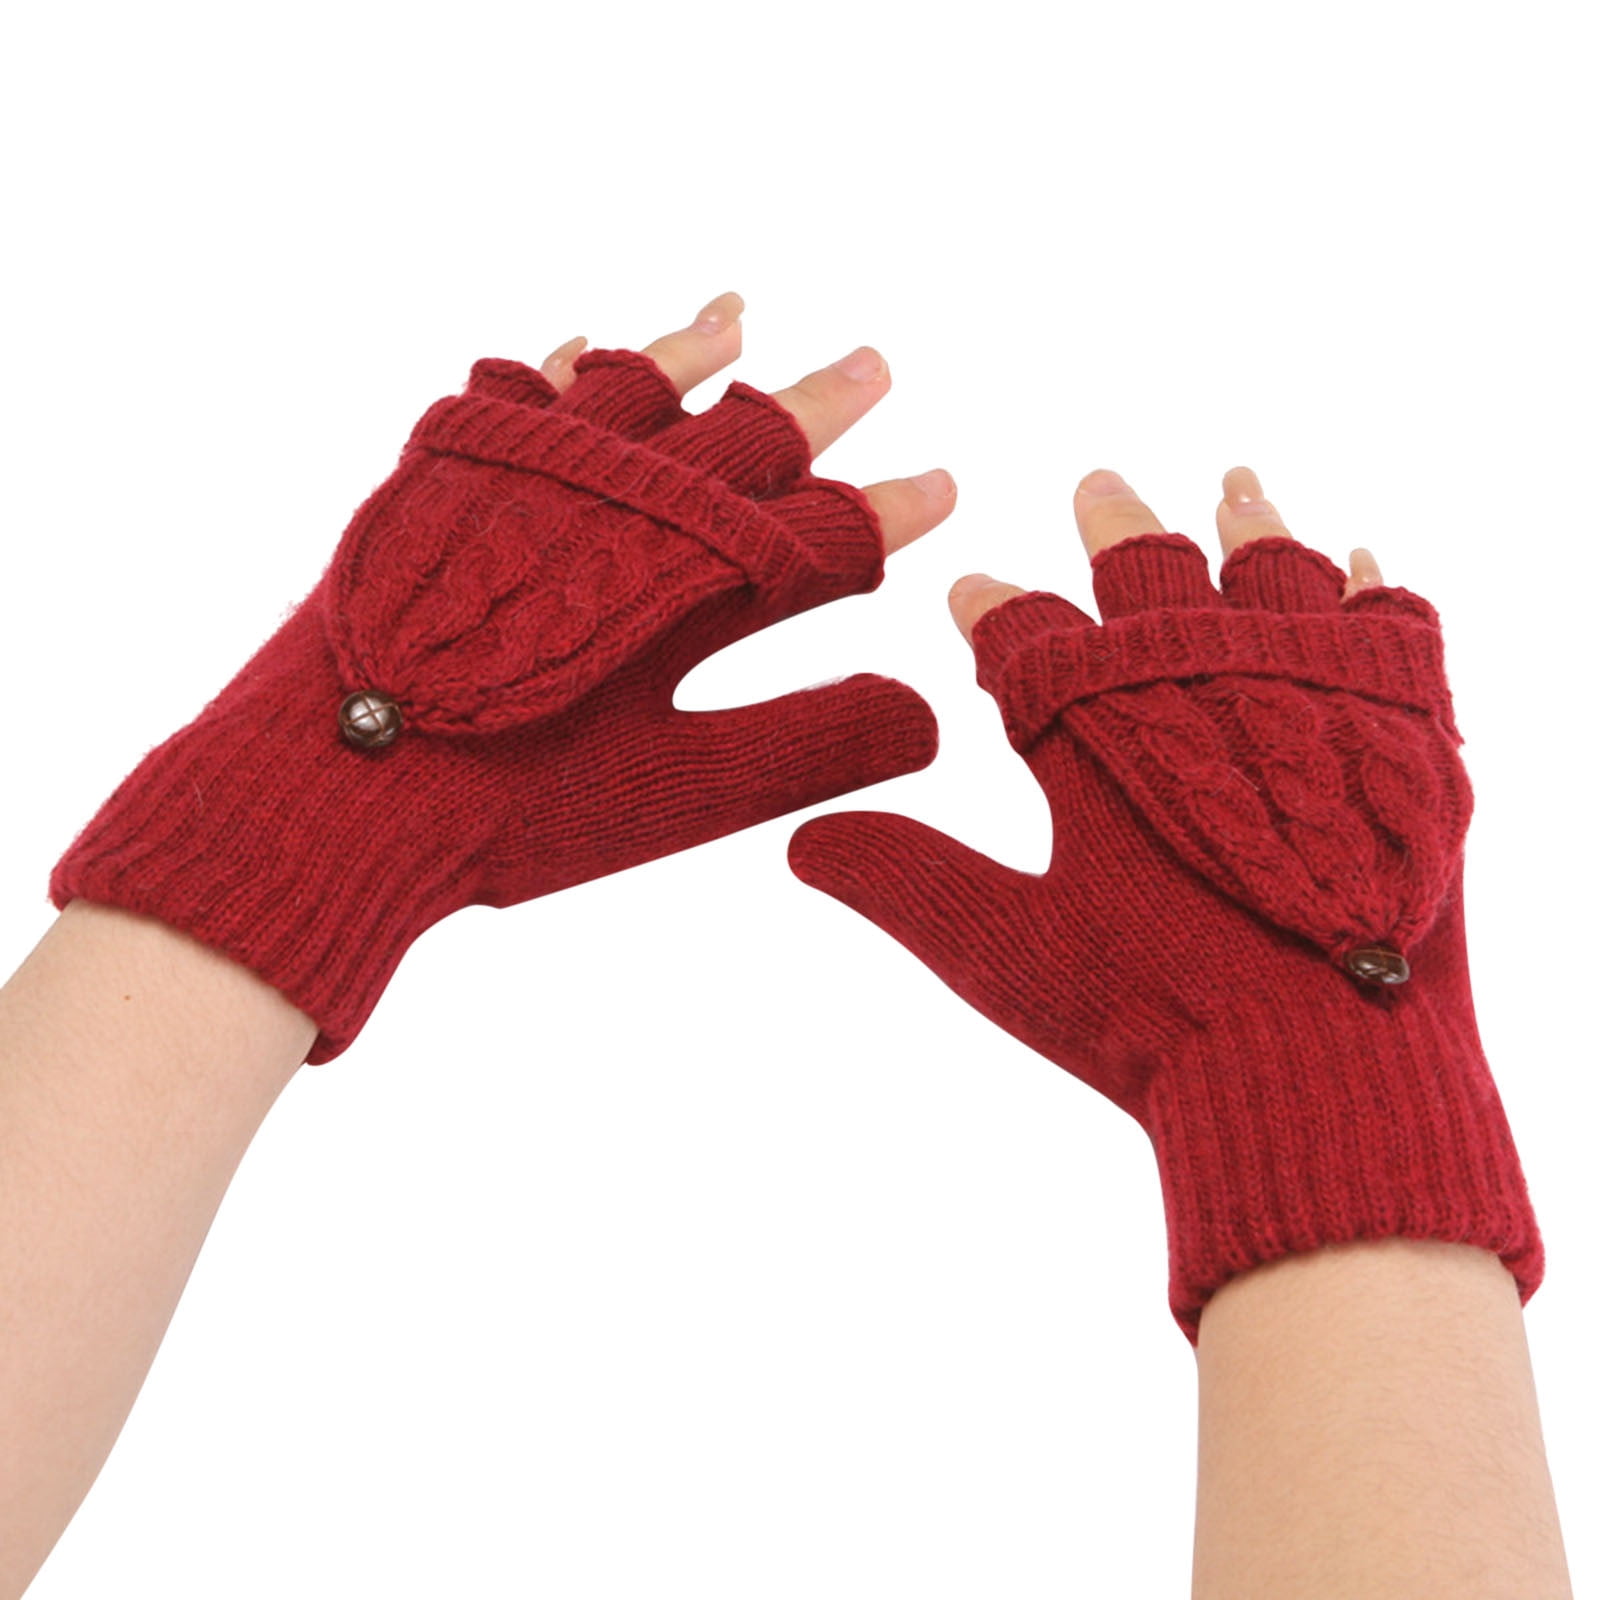  Women's Cold Weather Mittens - Reds / Women's Cold